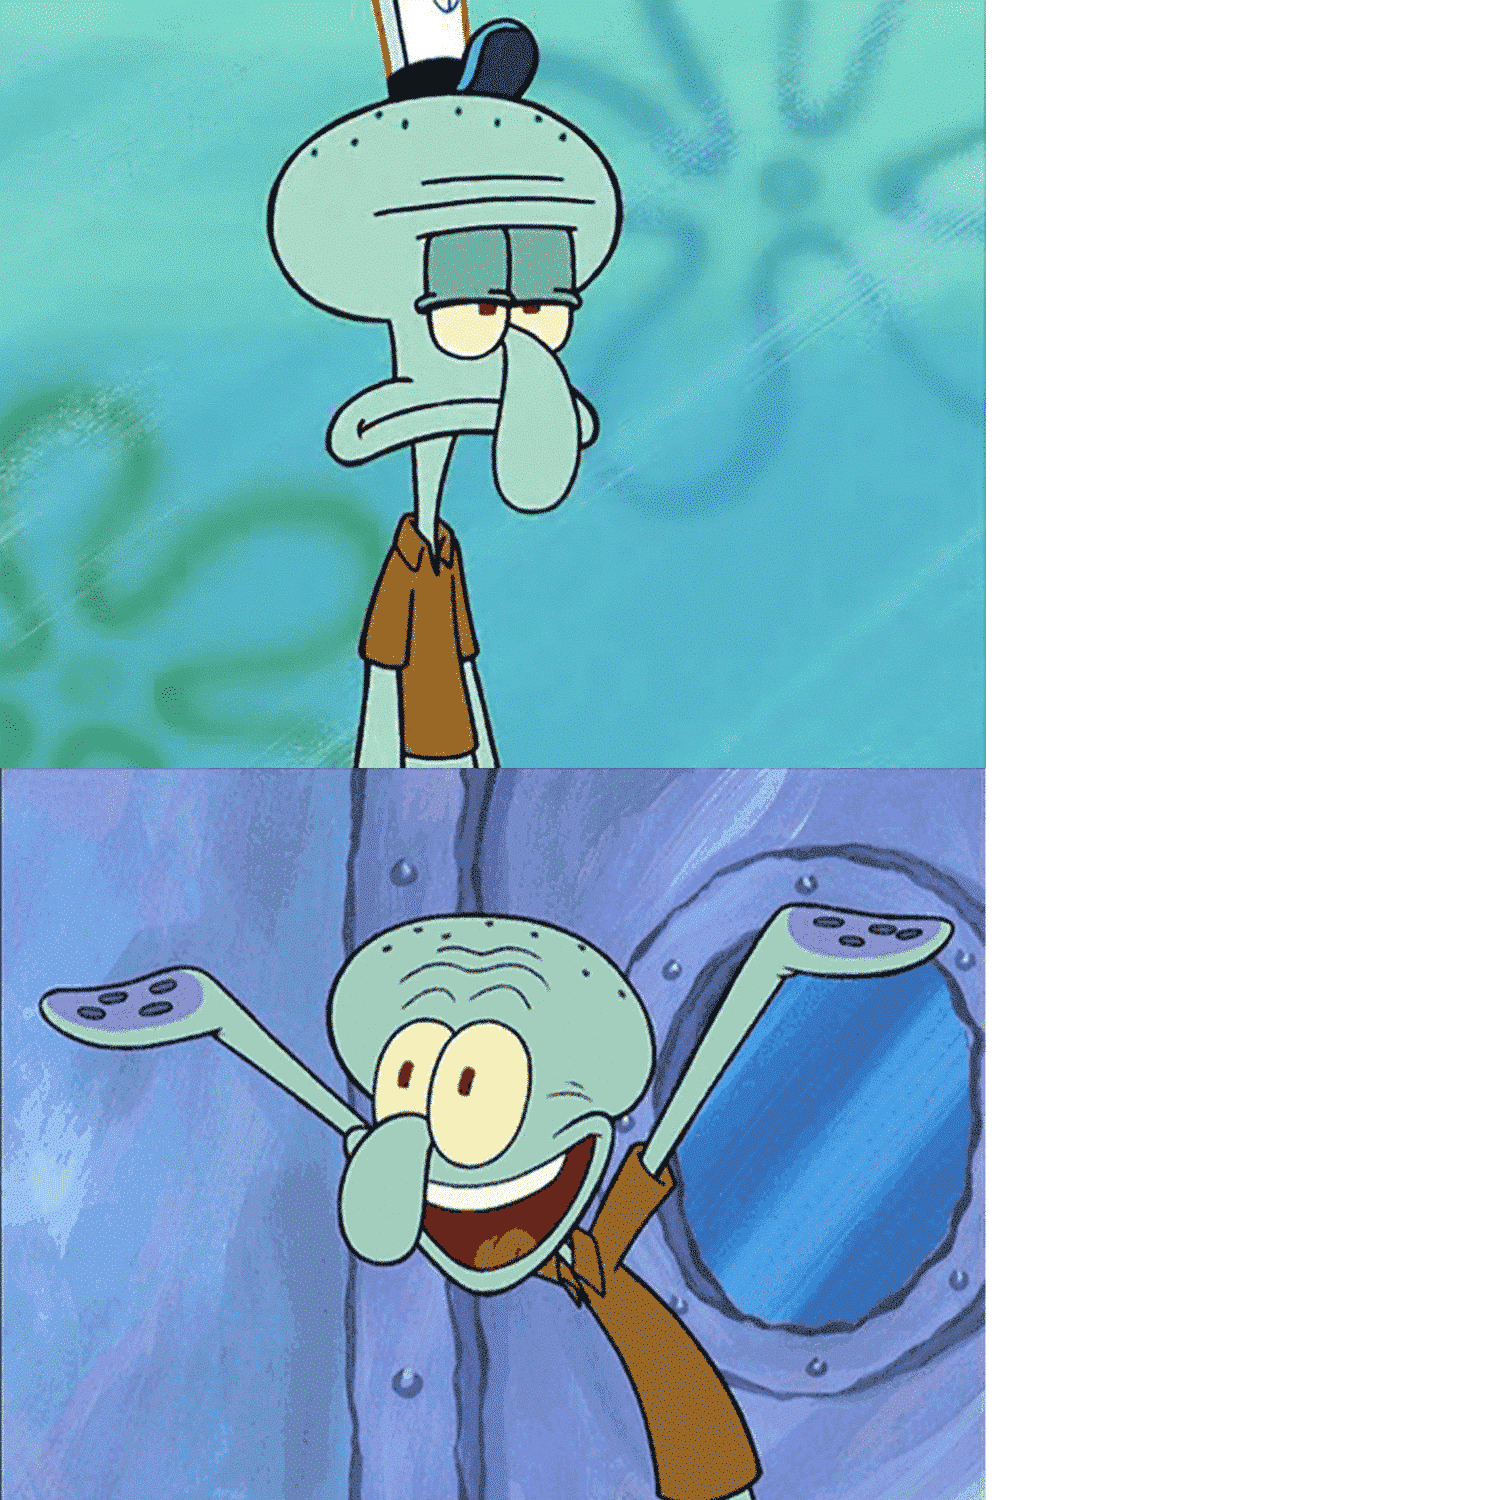 Meme Generator Squidward Sad Then Happy Newfa Stuff Explore and share the latest happy then sad pictures, gifs, memes, images, and photos on imgur. meme generator squidward sad then